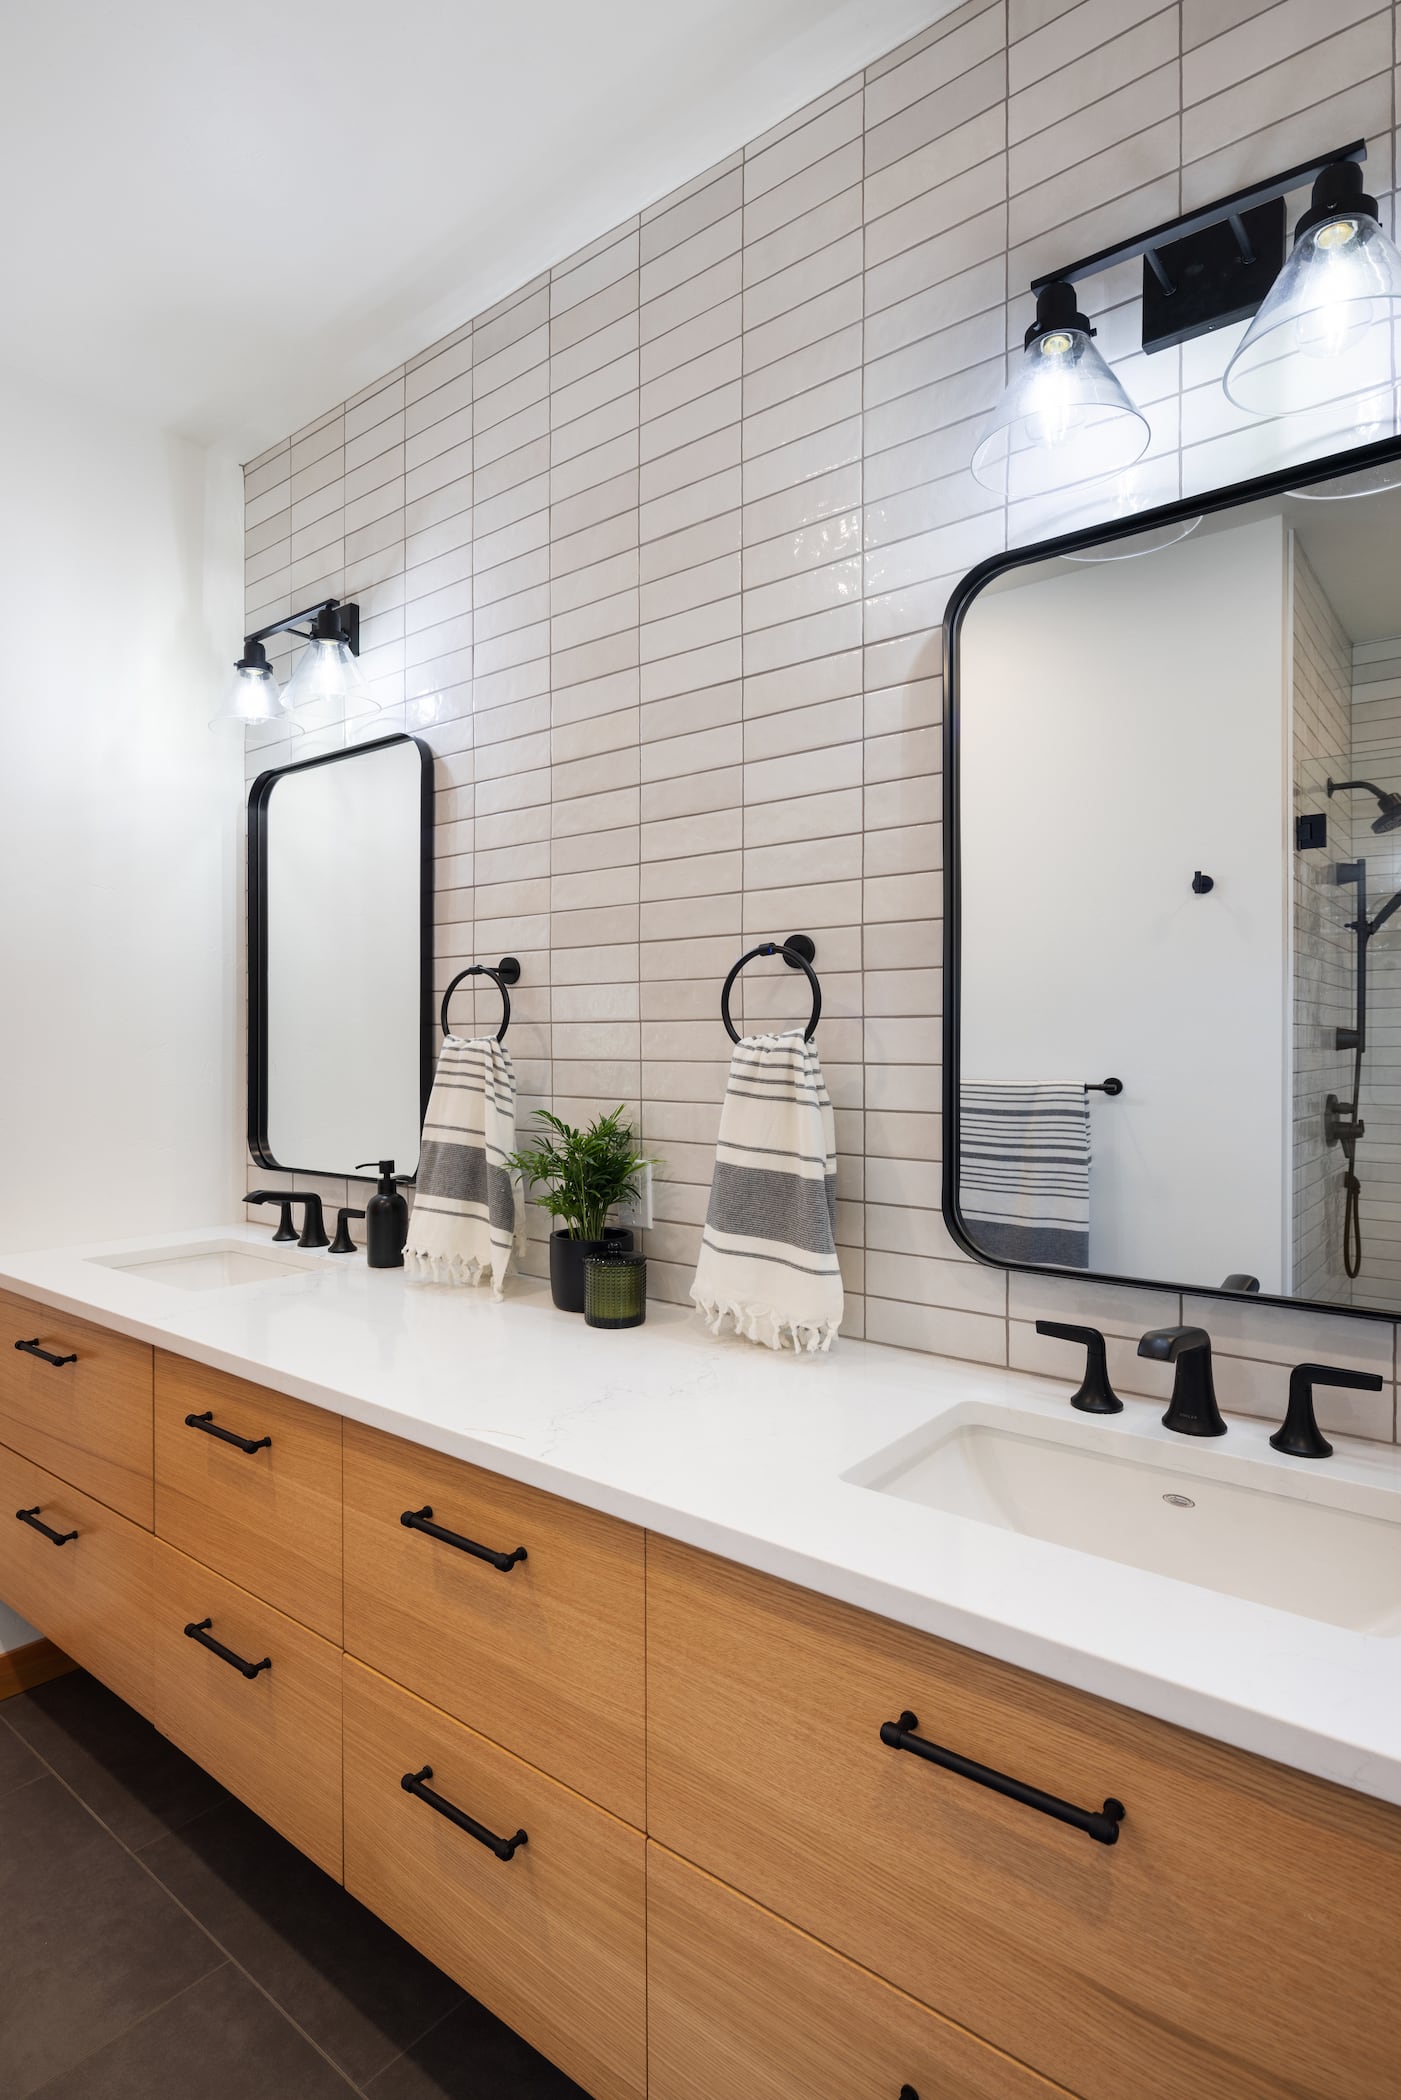 a modern two person bathroom sink setup with subway tile